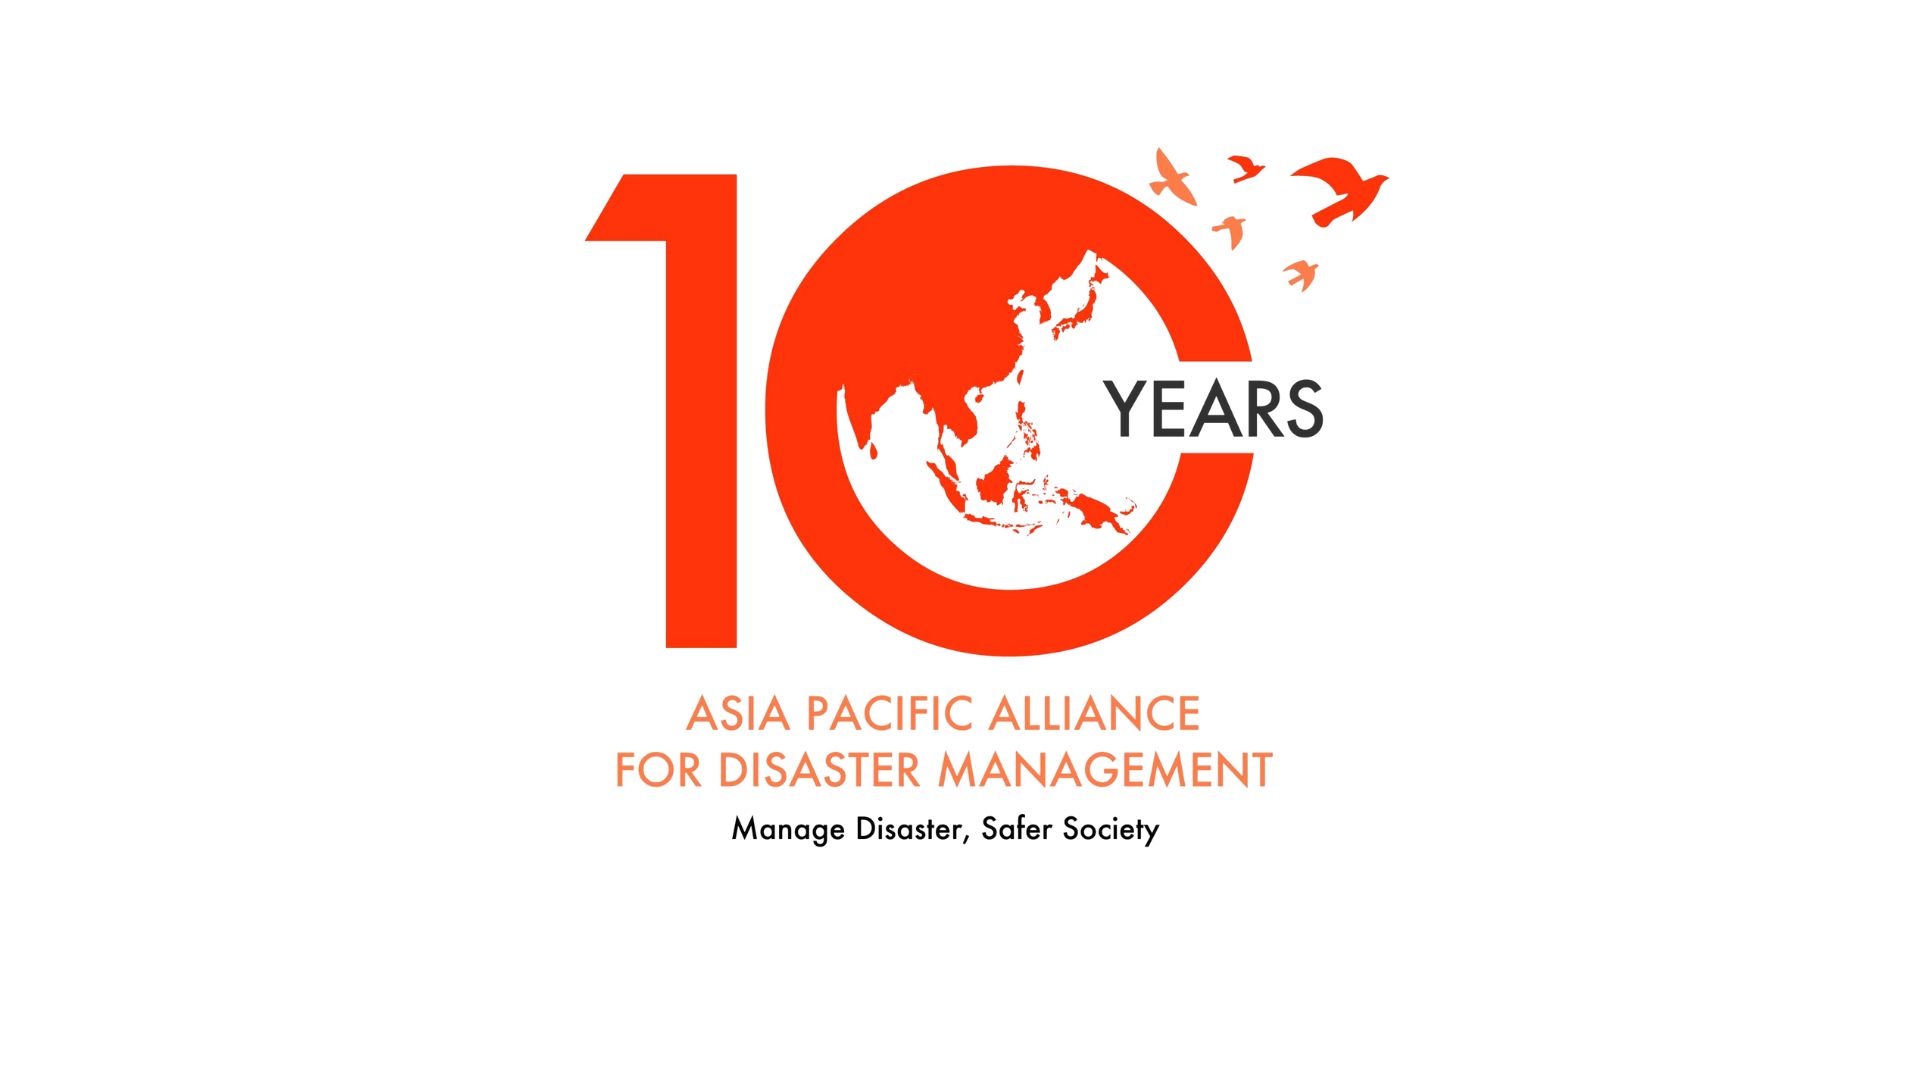 Reflecting upon a Decade of Impact: A-PAD Celebrates its 10th Year Anniversary